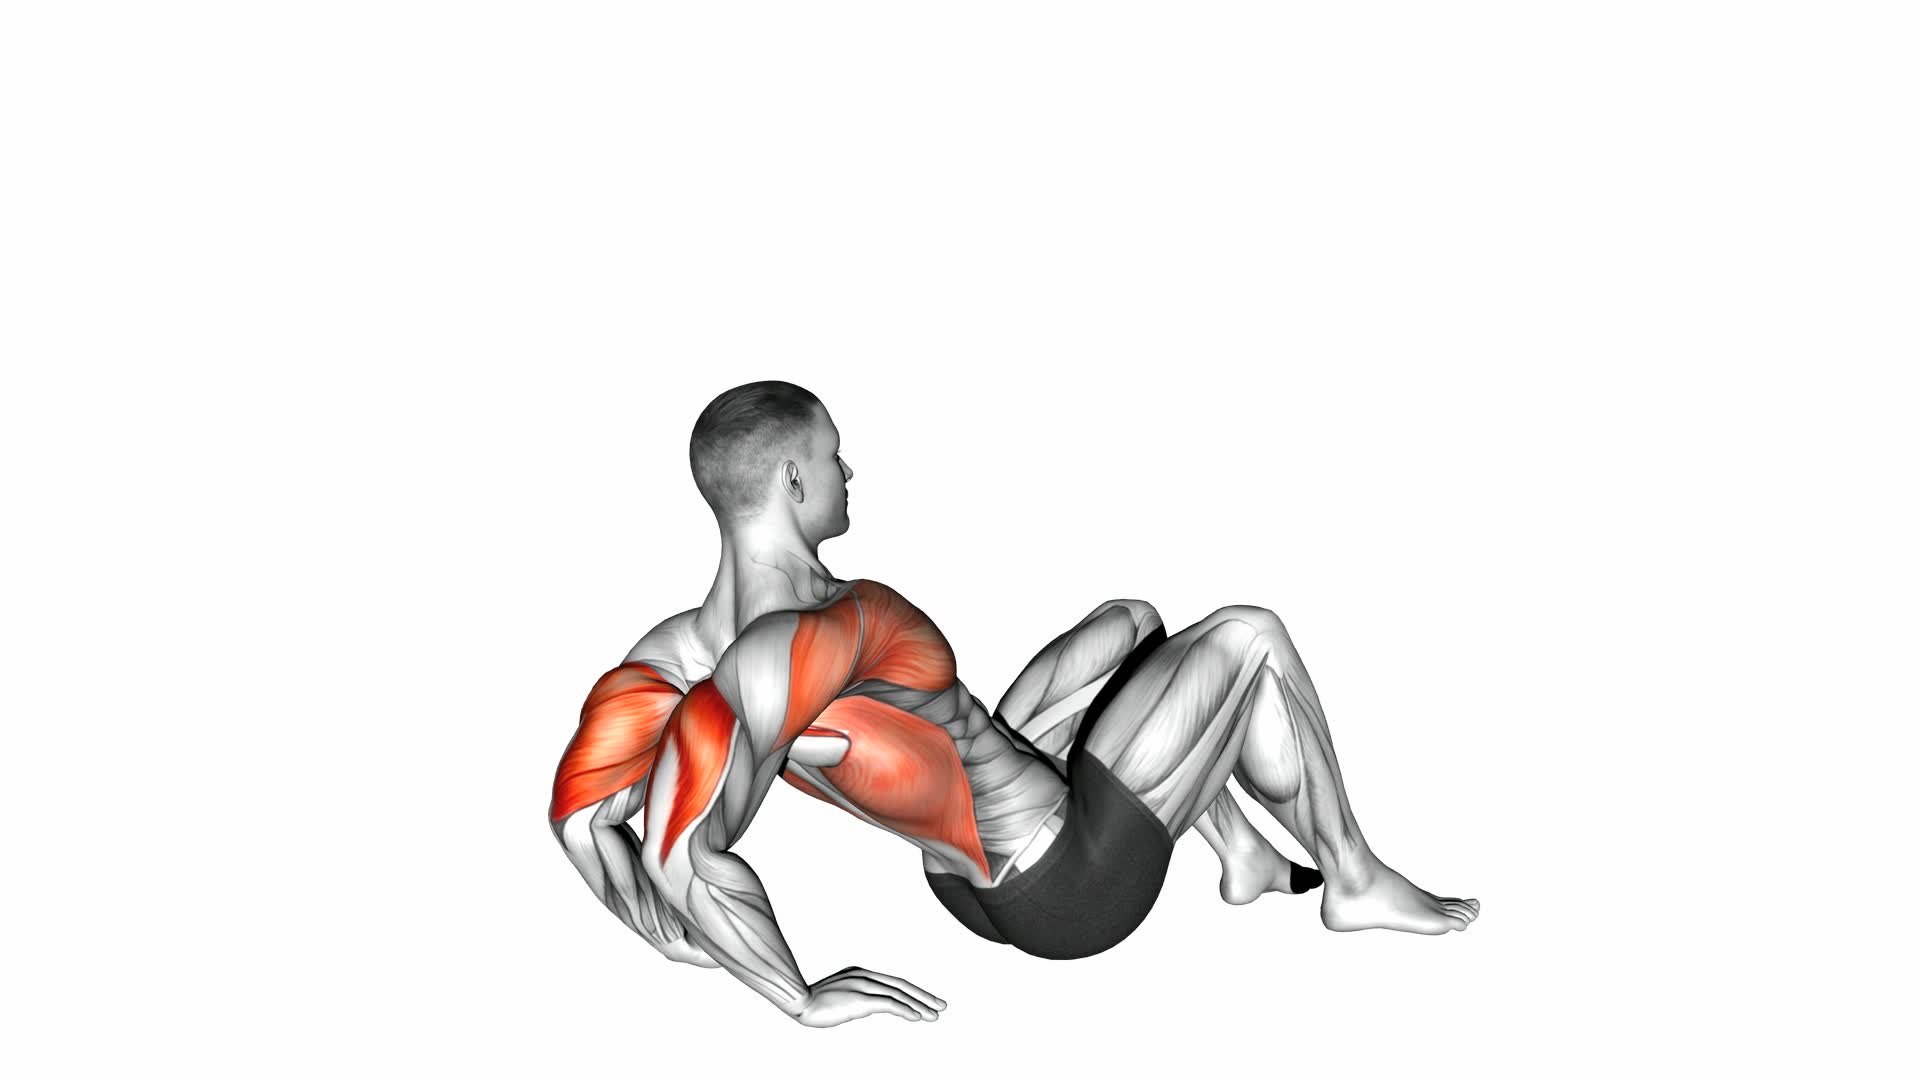 Triceps Dips Floor - Video Exercise Guide & Tips